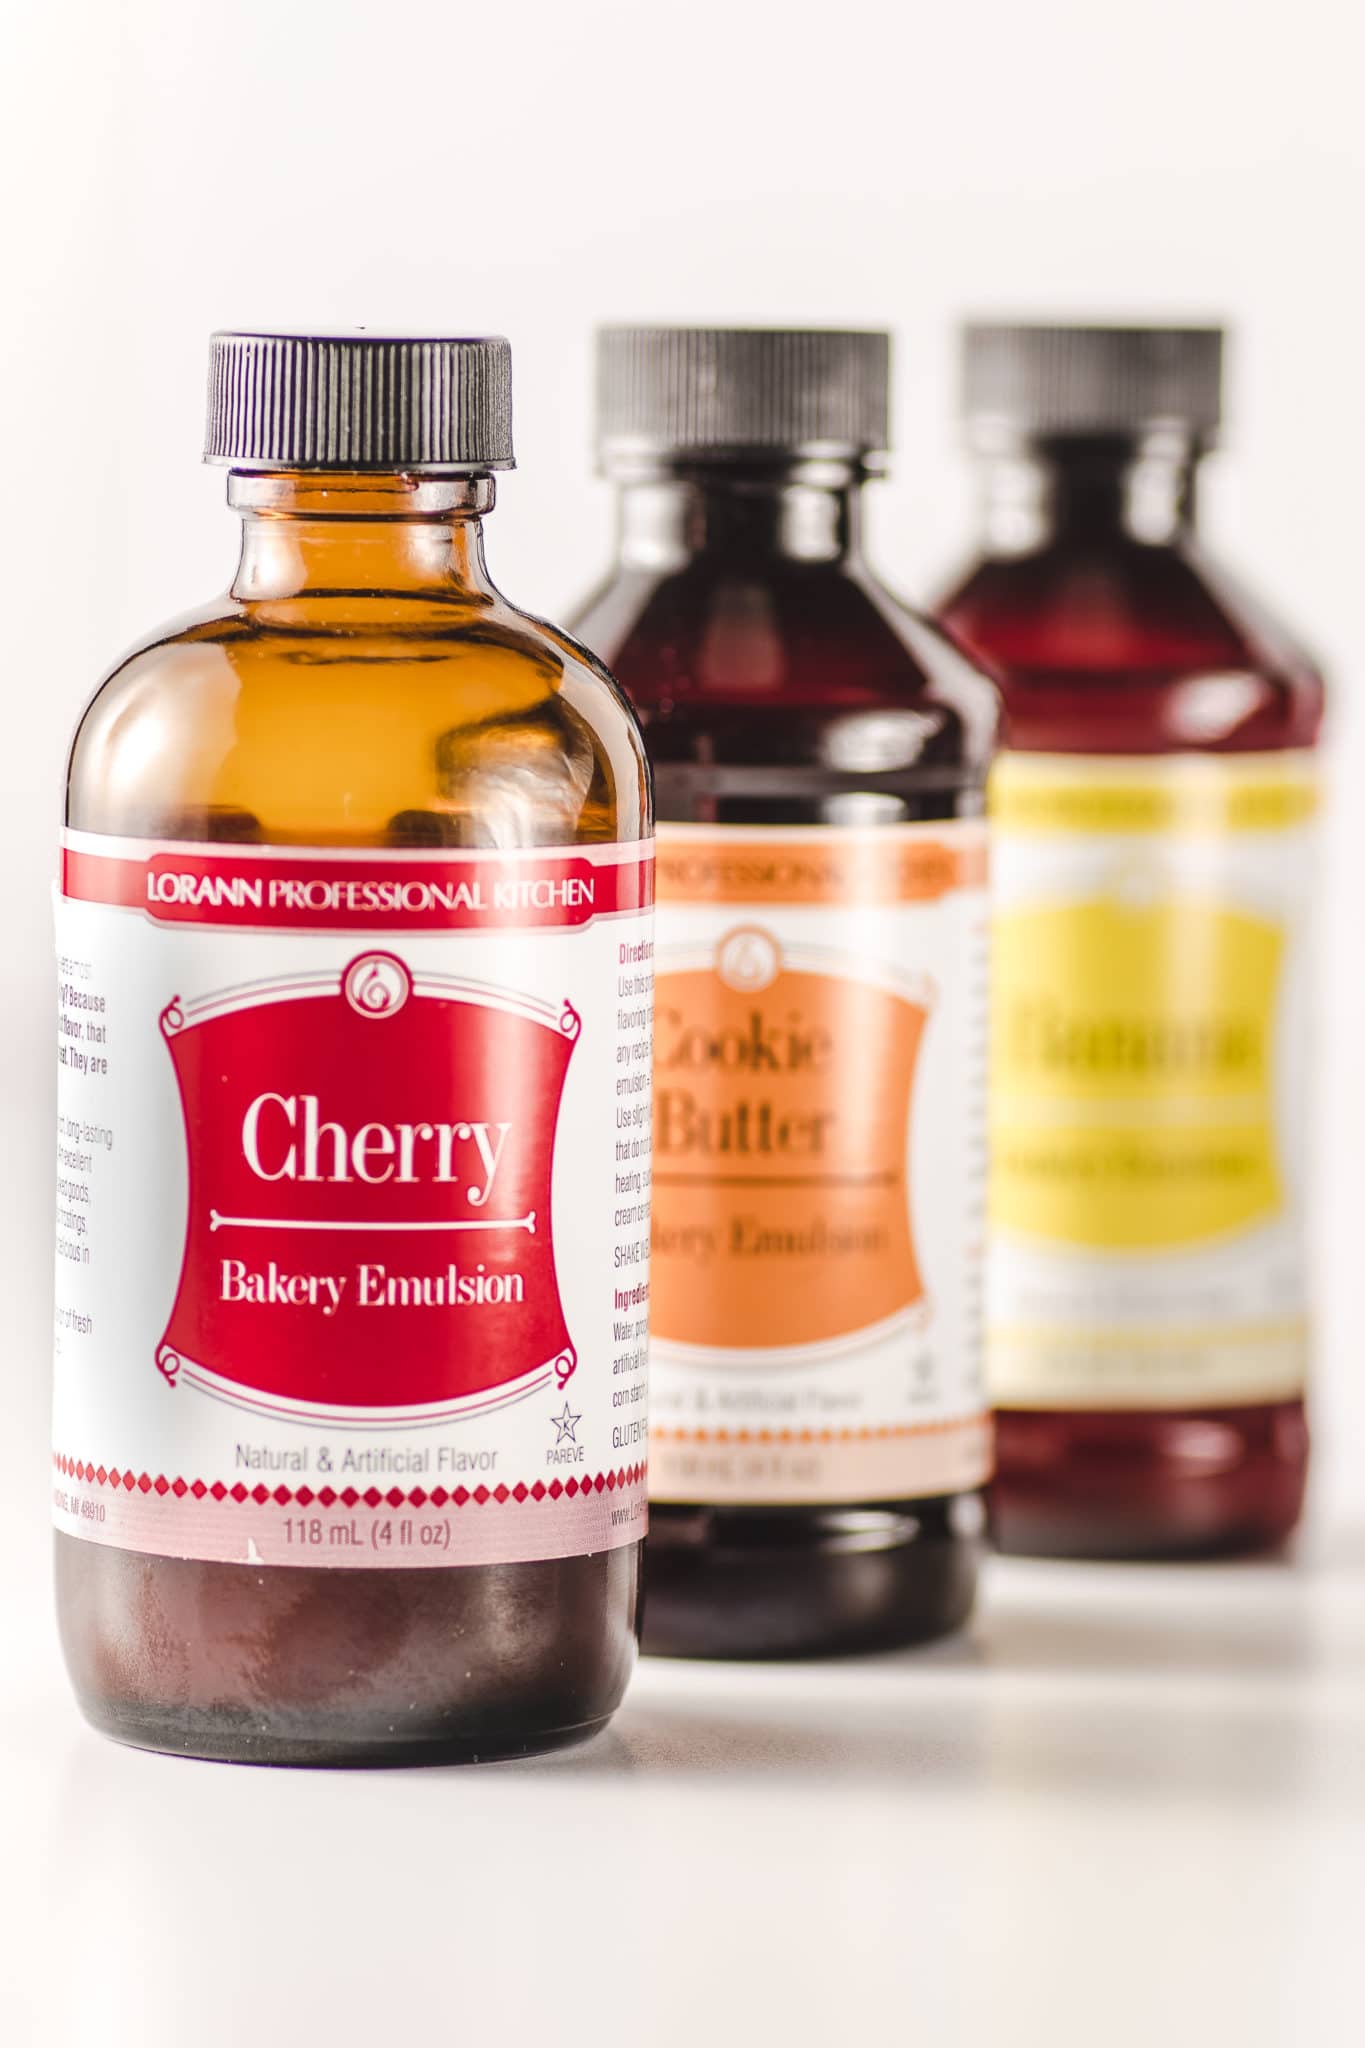 Brown glass bottles of flavored bakery emulssions with brightly colored labels on a white background